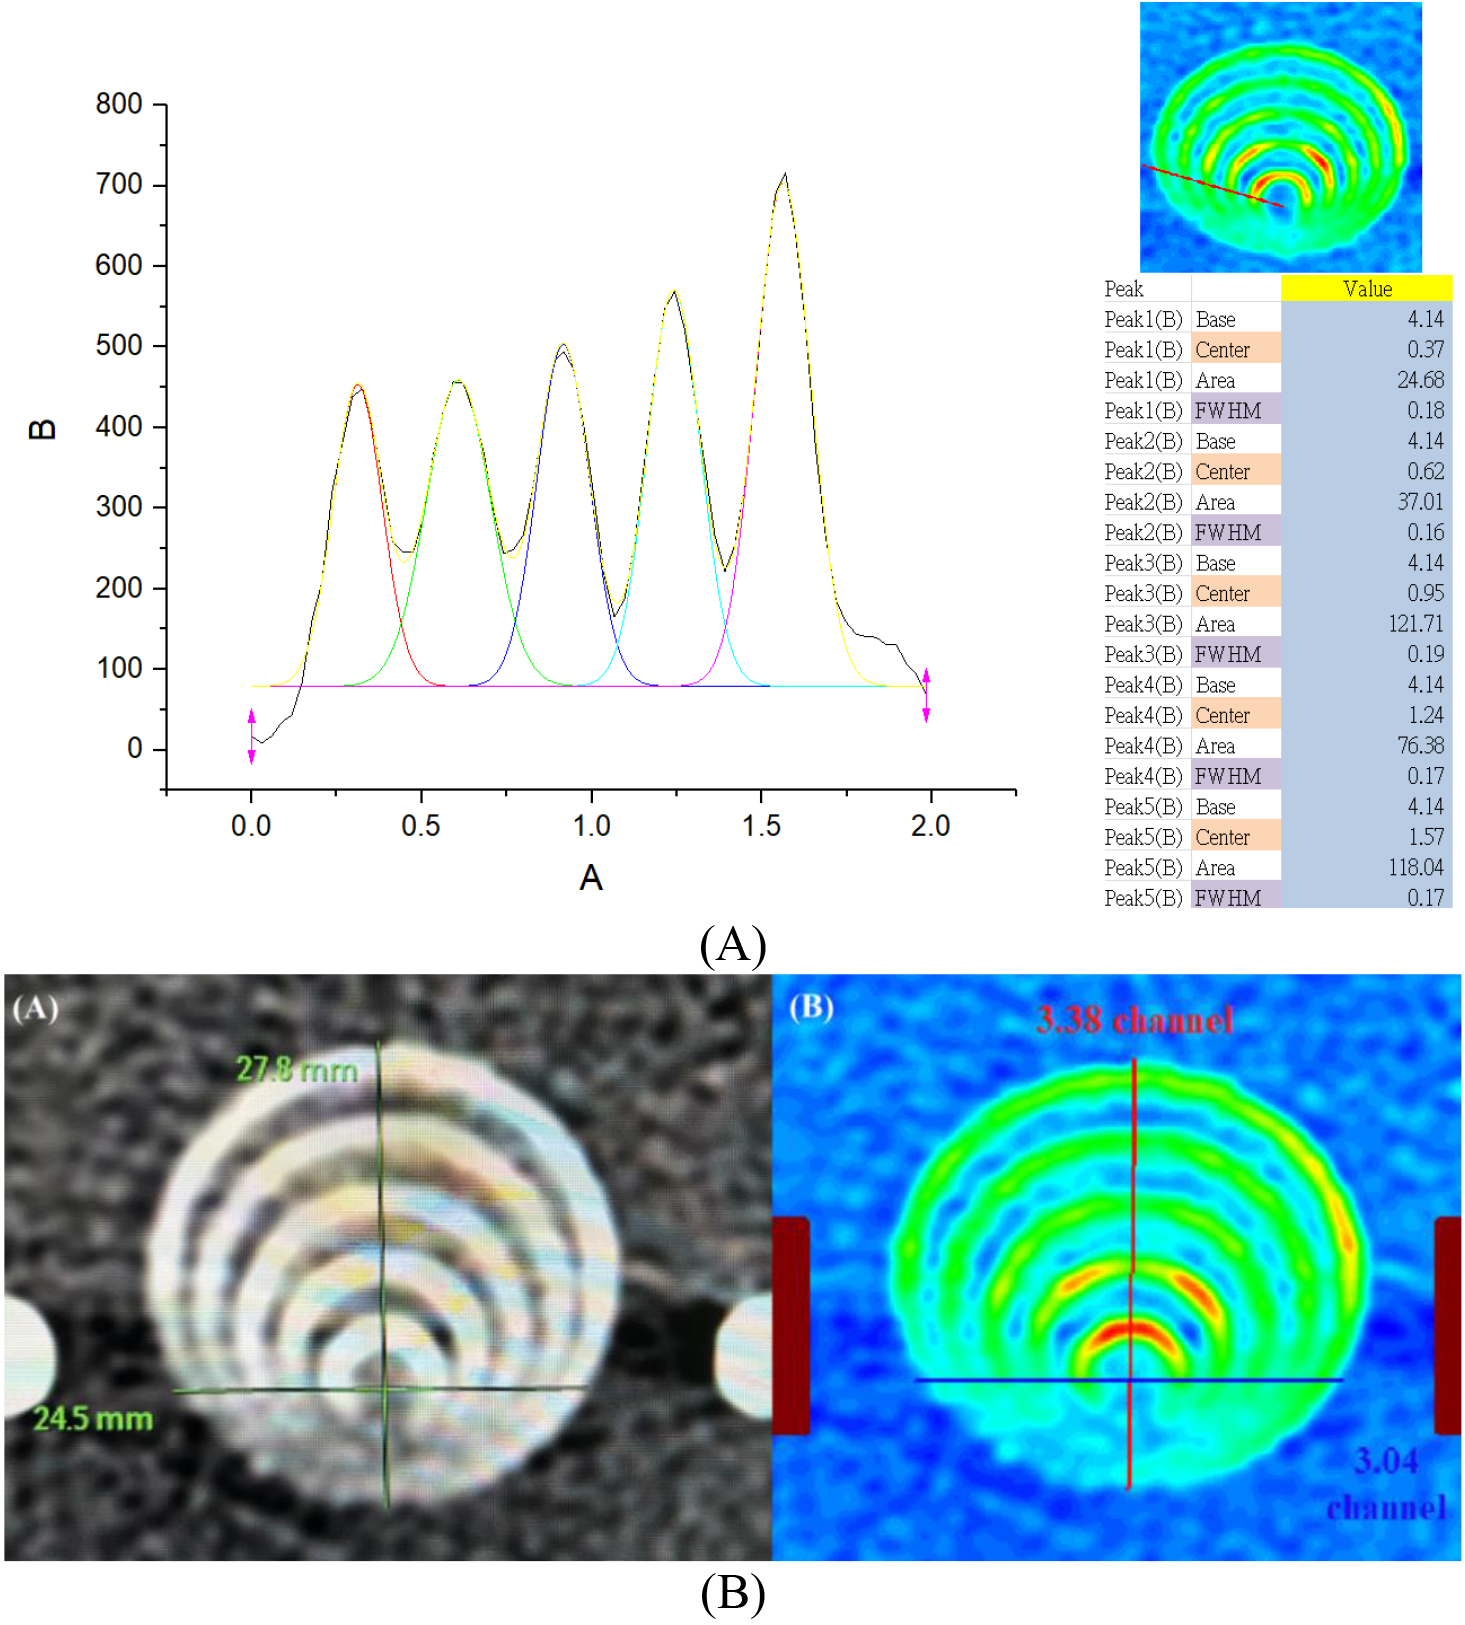 (A) The profile of the eccentric circles’ gauge from the CTA scan was converted from a gray image in DICOM format to an OriginPro data matrix of numerical digits and then analyzed by the default program to obtain the peak center and FWHM. (B) The original grayscale of eccentric circles in DICOM format (left) and redrawn data matrix from the OriginPro output (right).